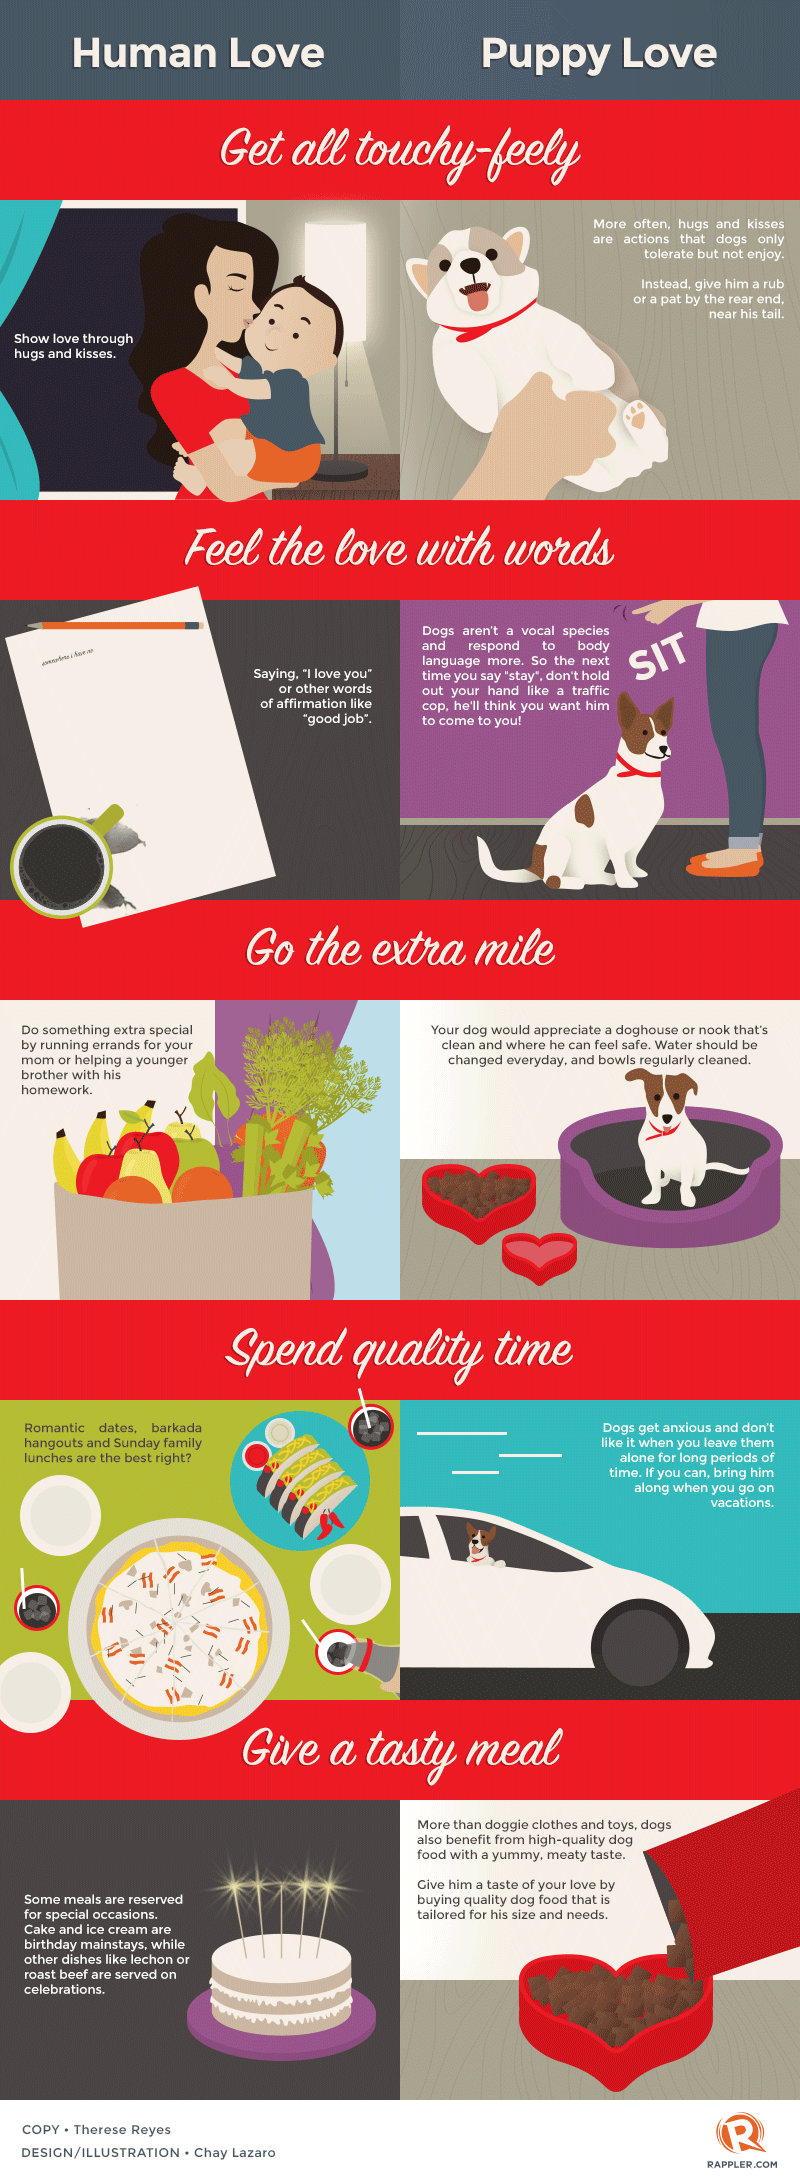 Match your dog’s love in the most kilig way